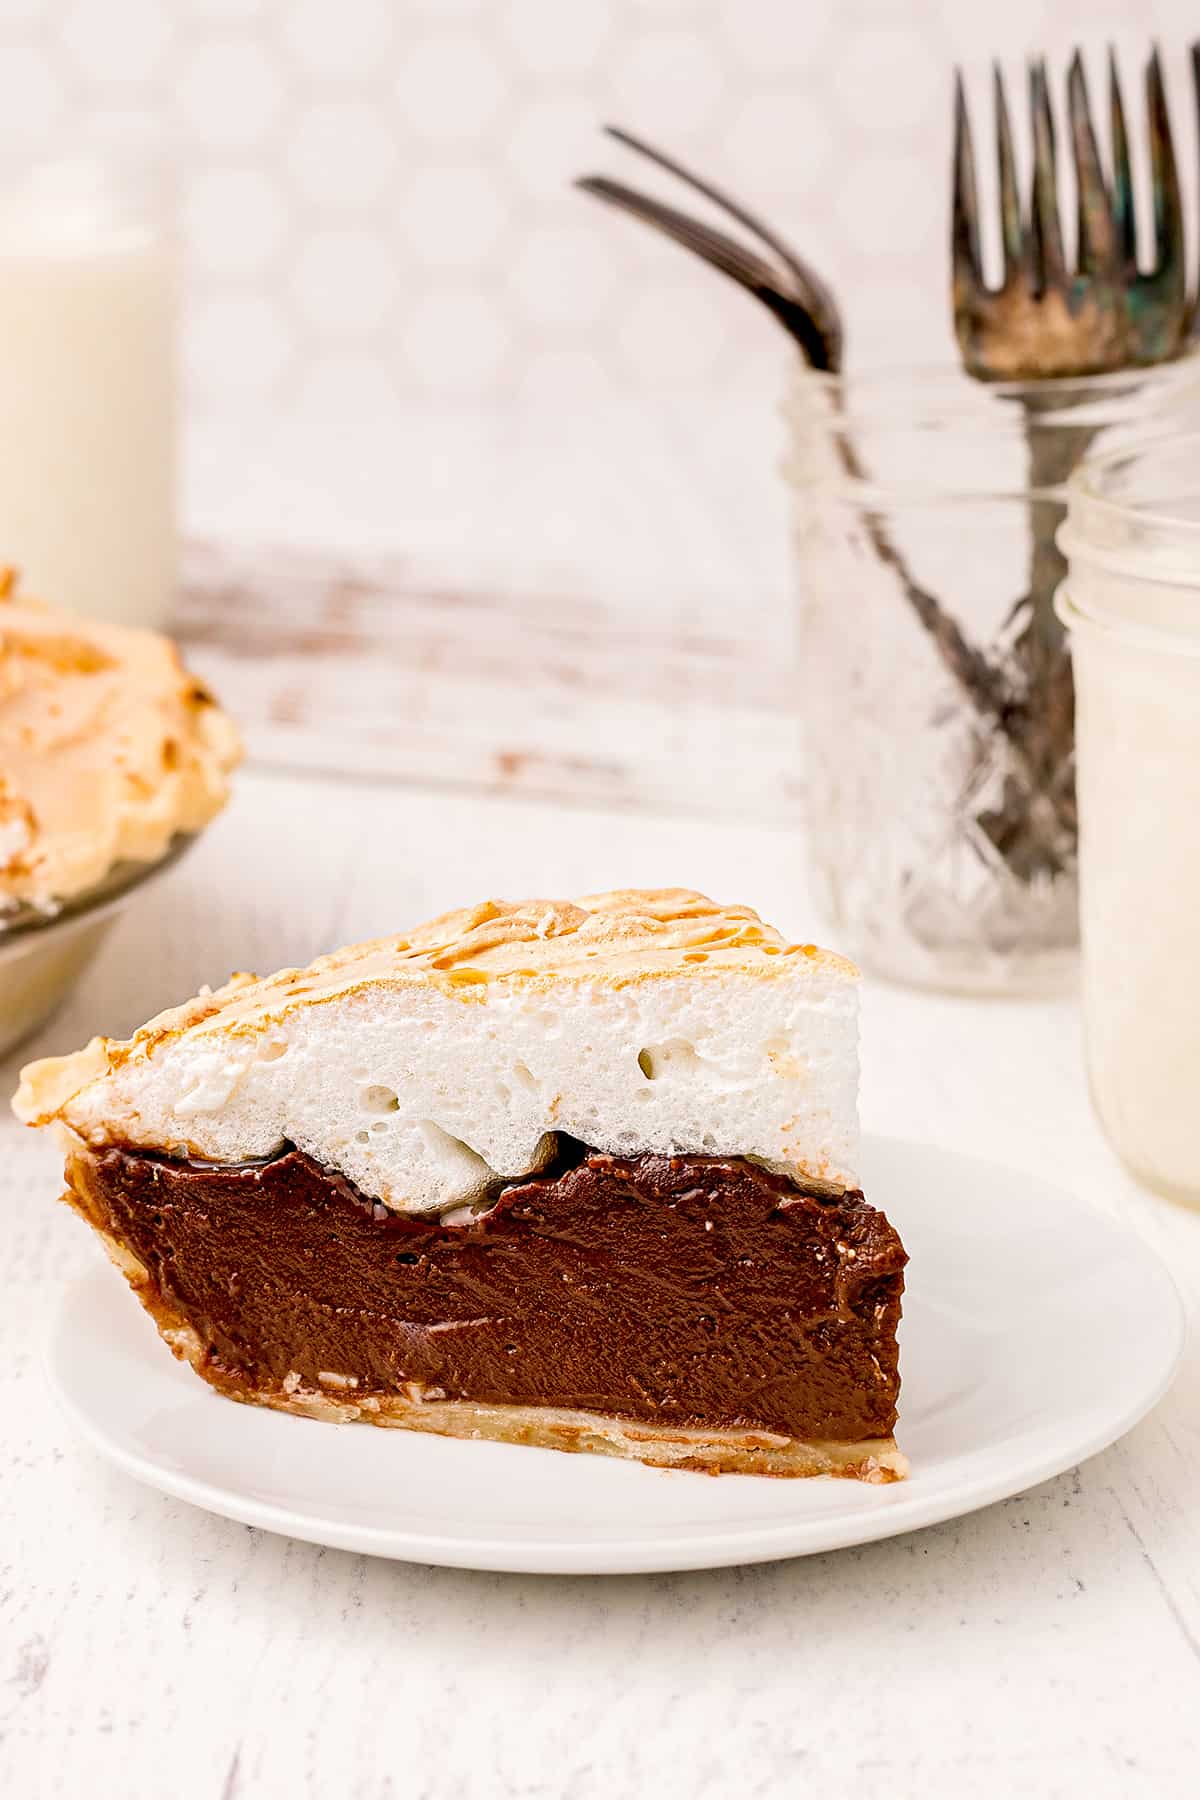 A slice of old fashioned chocolate meringue pie on a white serving plate.